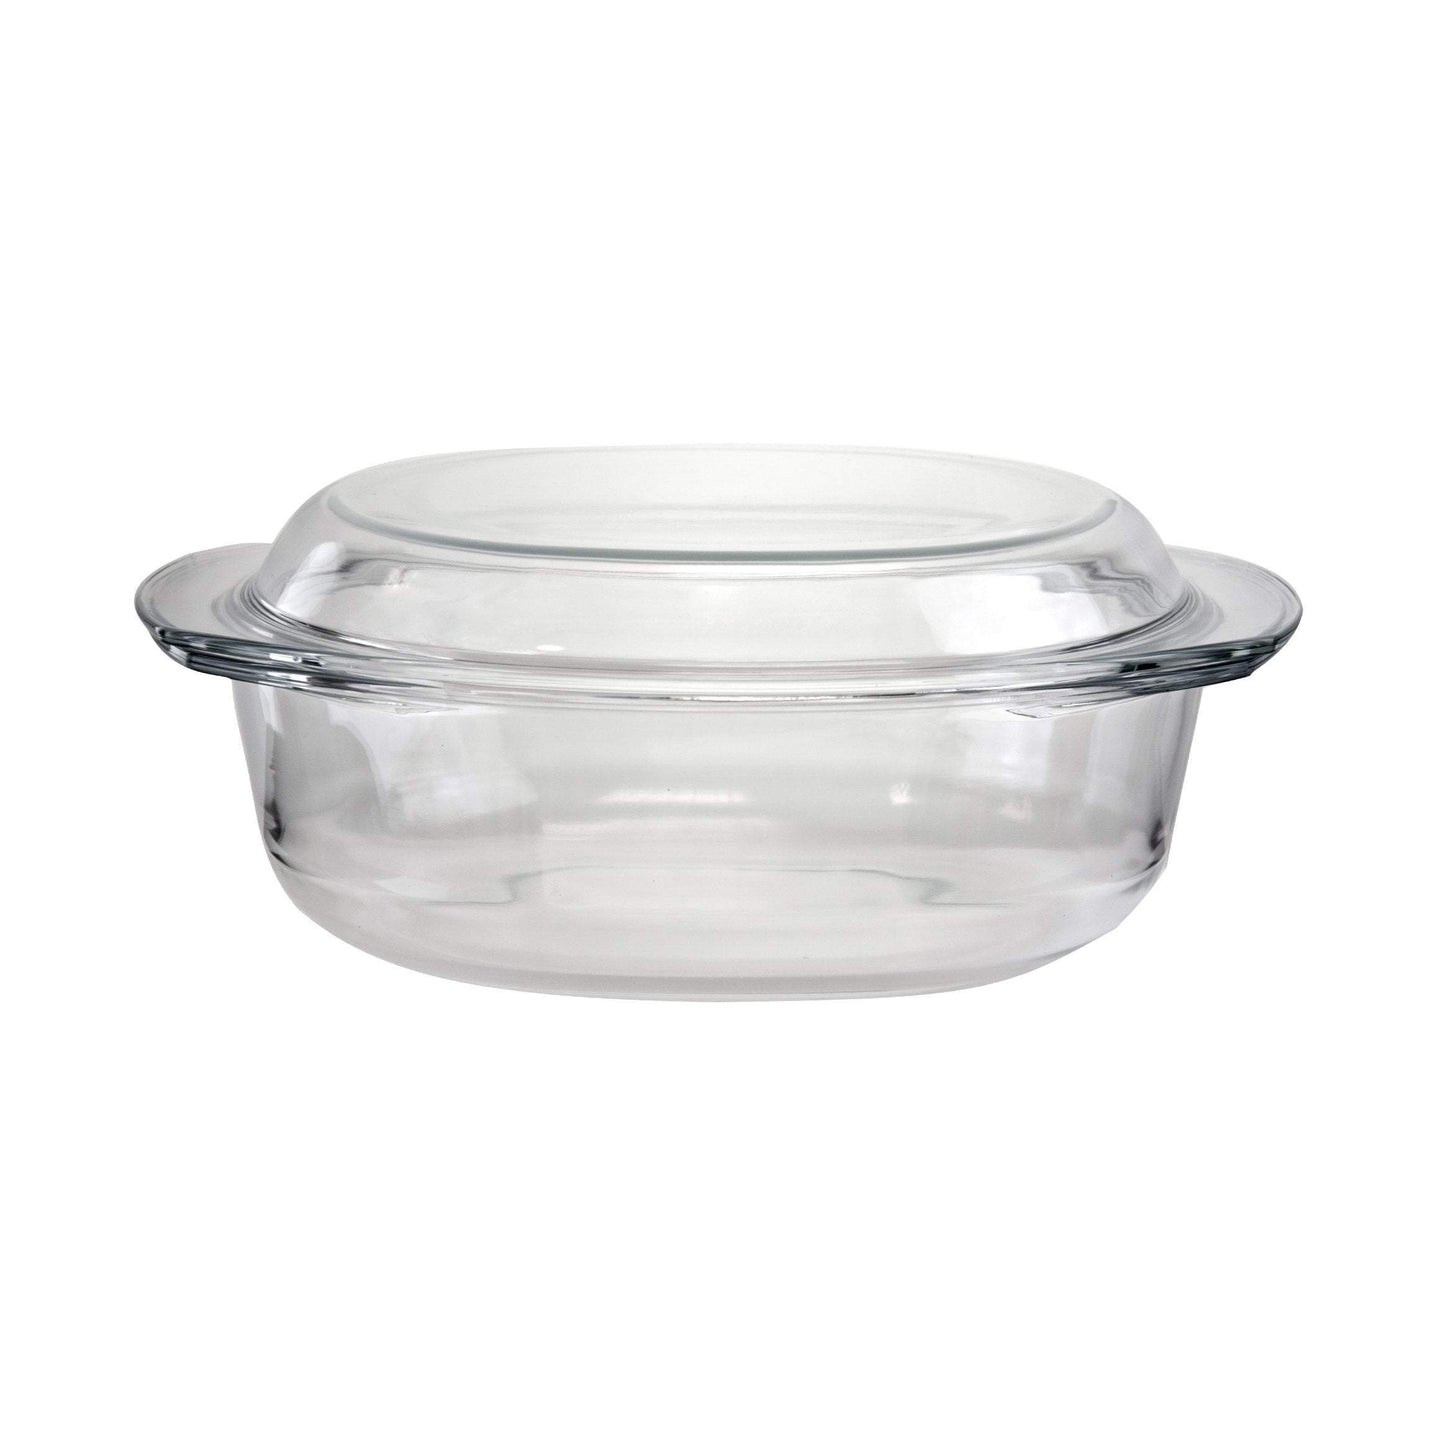 Rectangular Casserole Tempered Glass Curry Stock Pot With Lids 3.5 Litre 2129 (Parcel Rate)